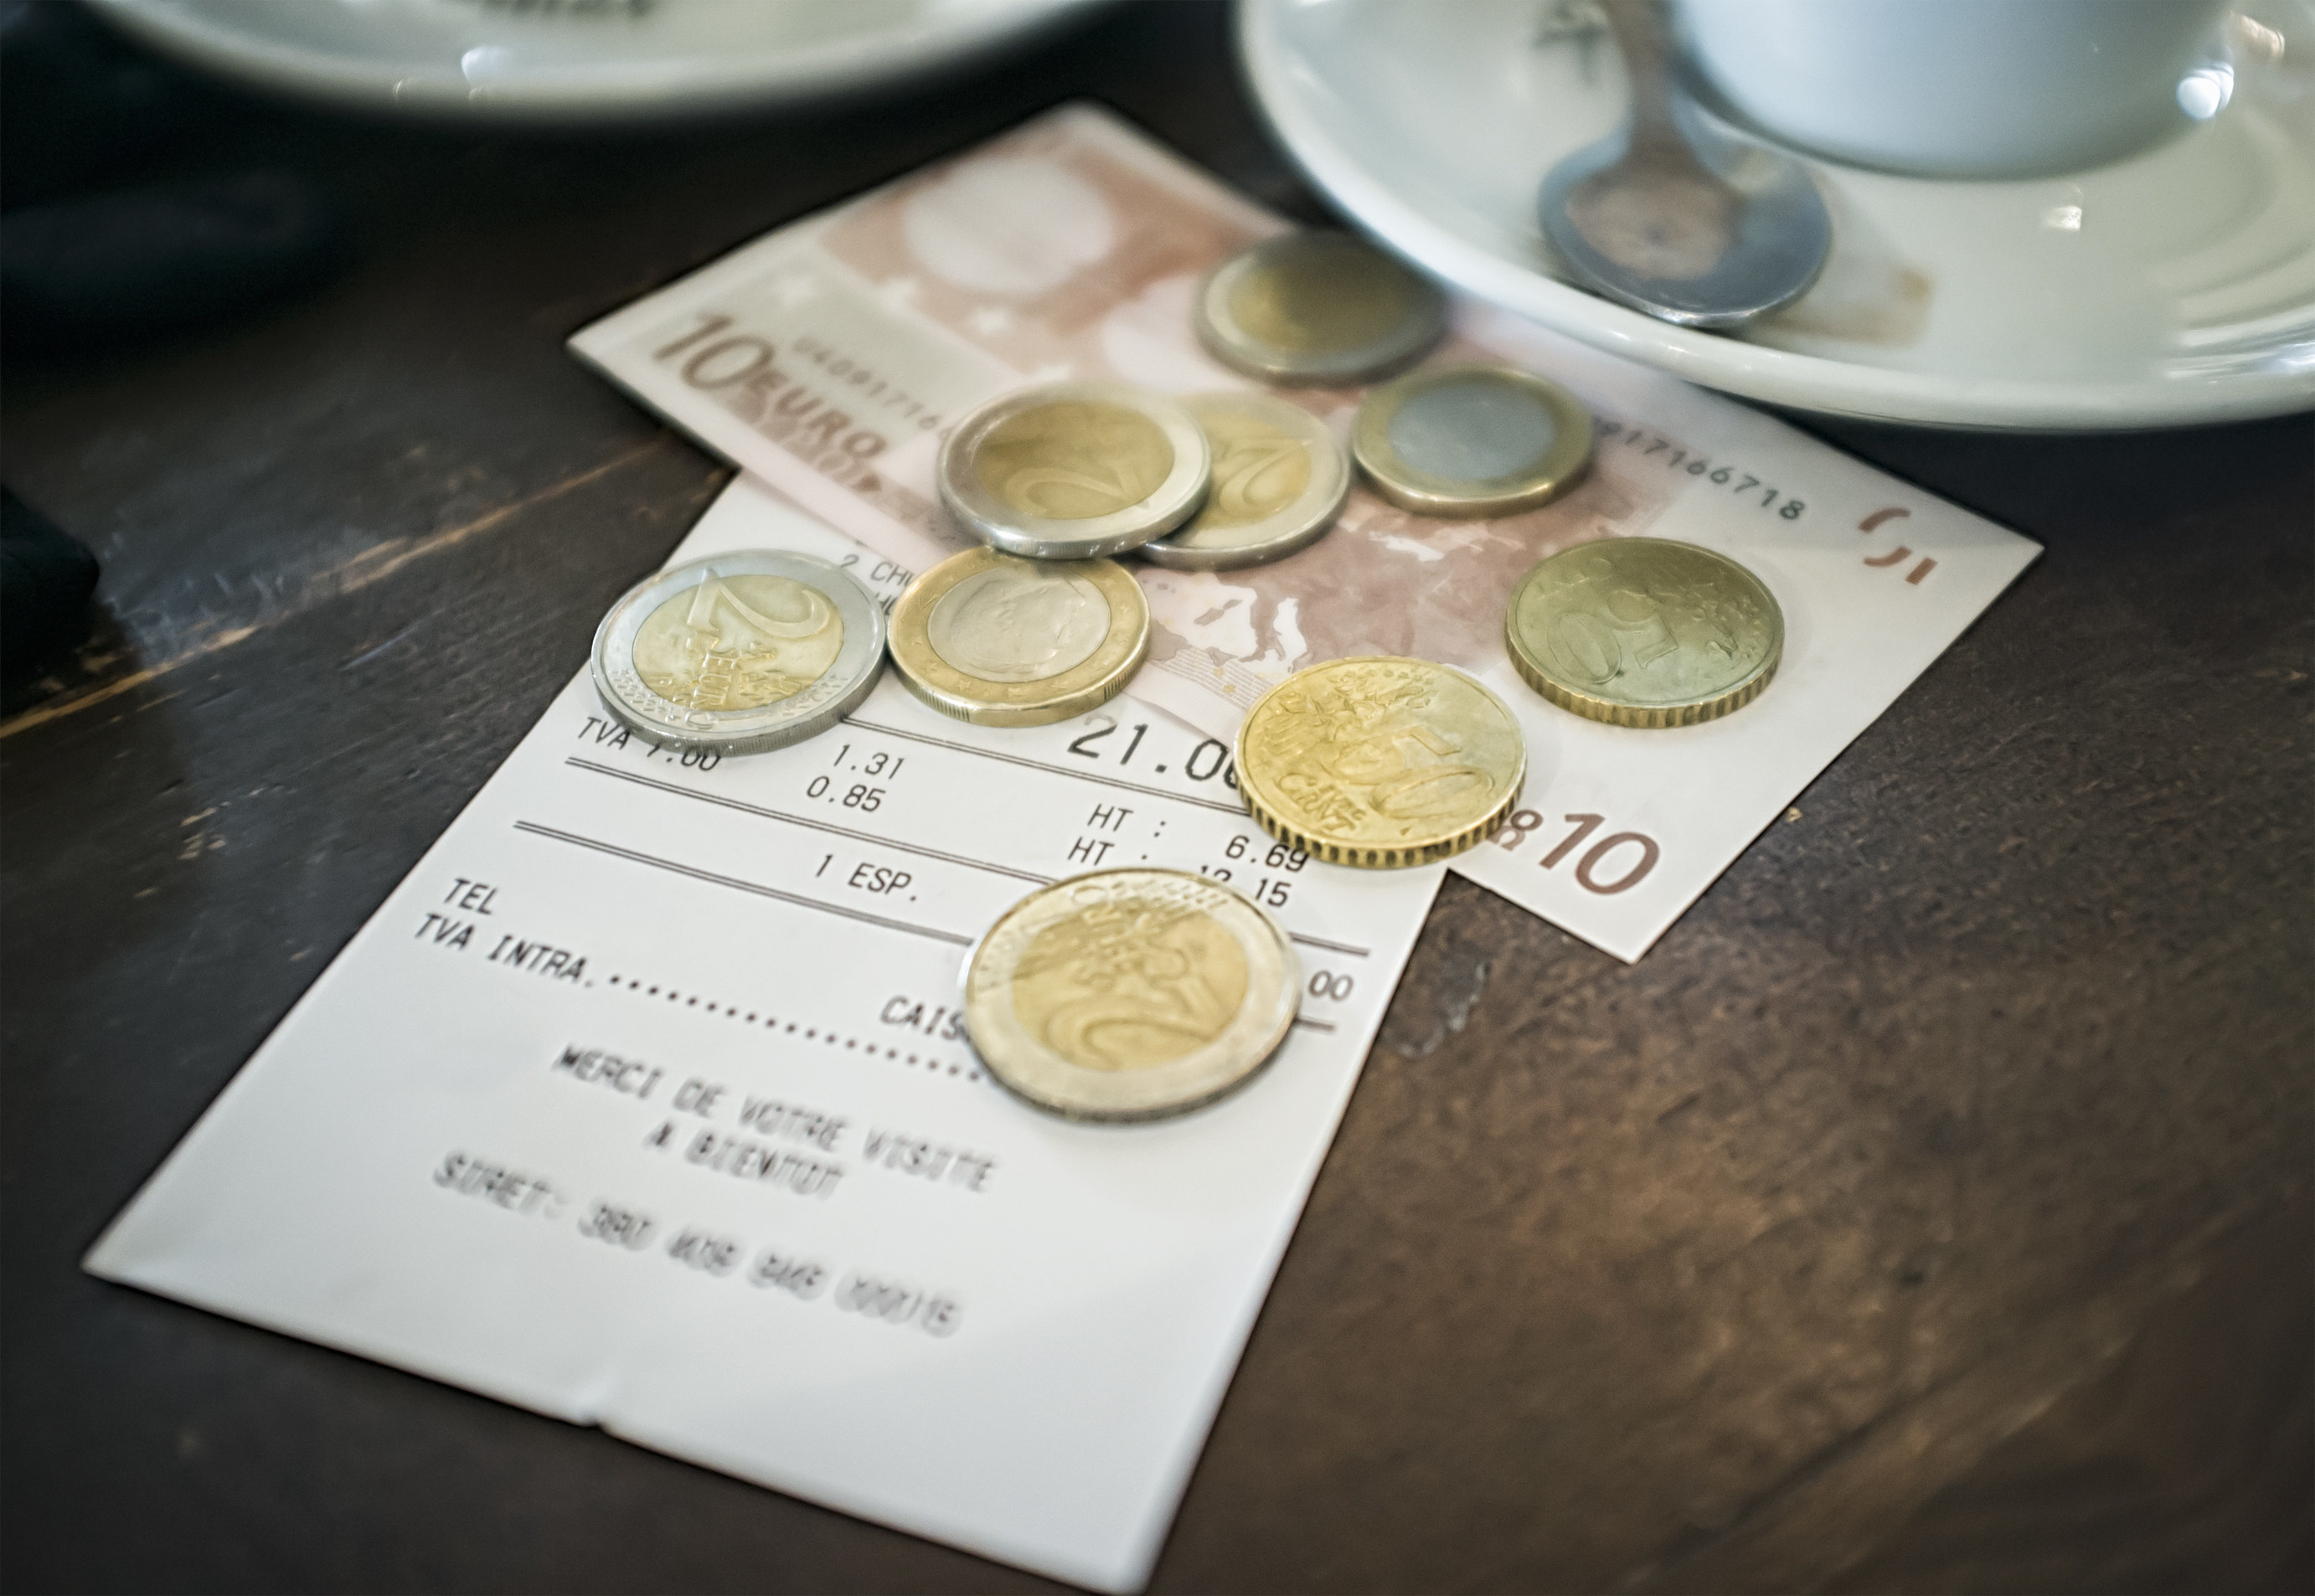 A bill with payment in euros on the table of a cafe